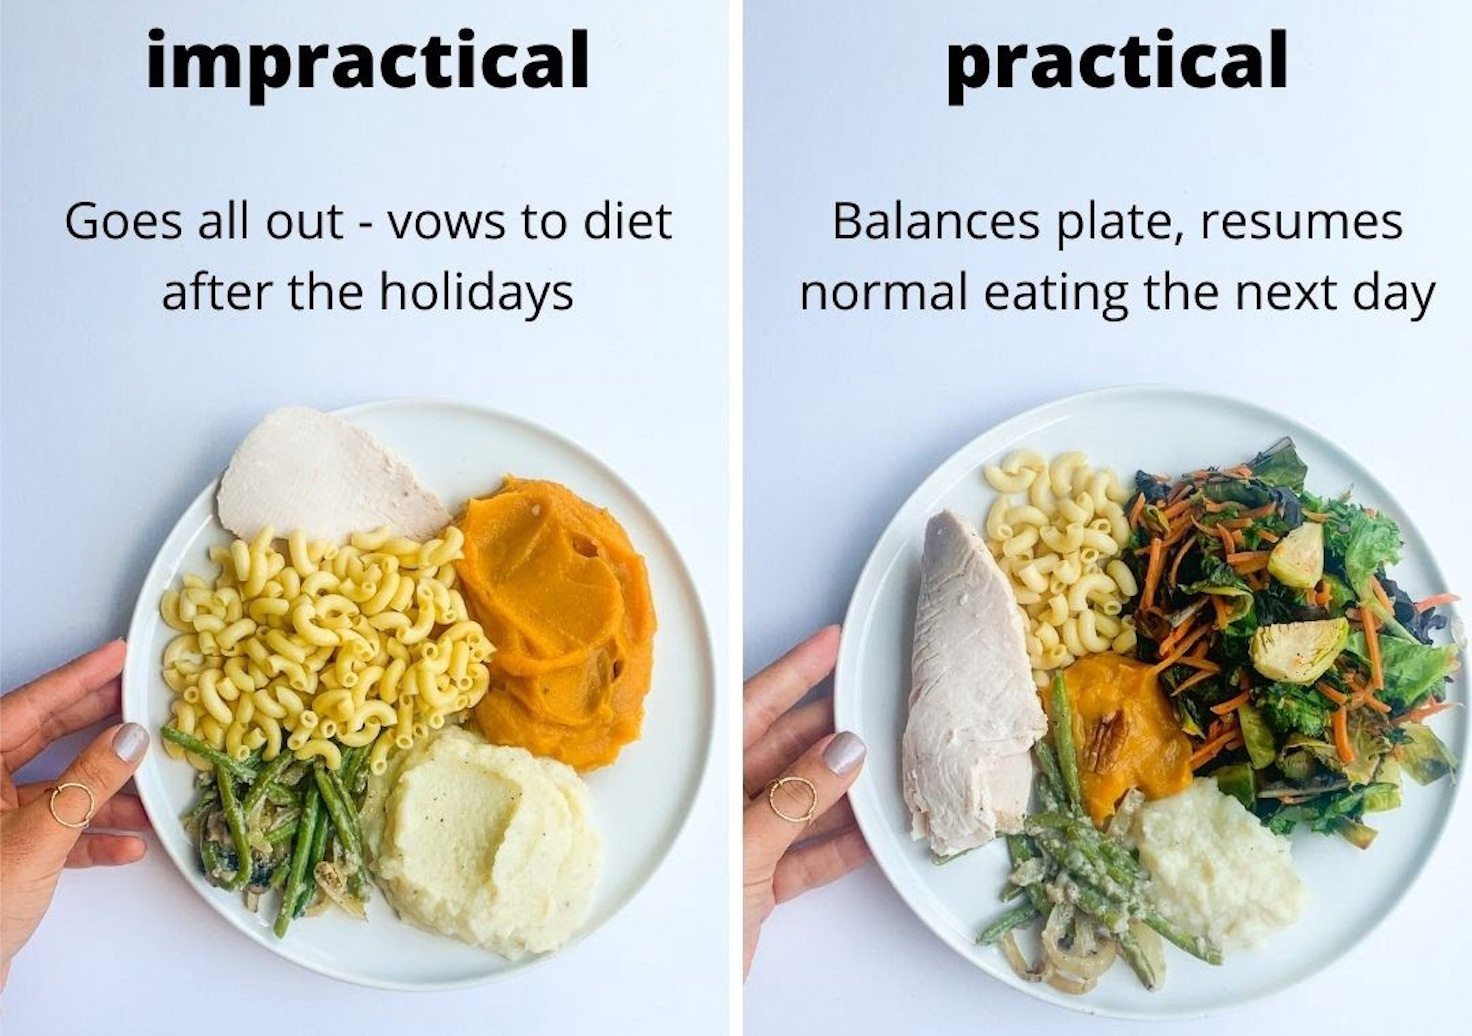 An impractical meal vs. a practical meal